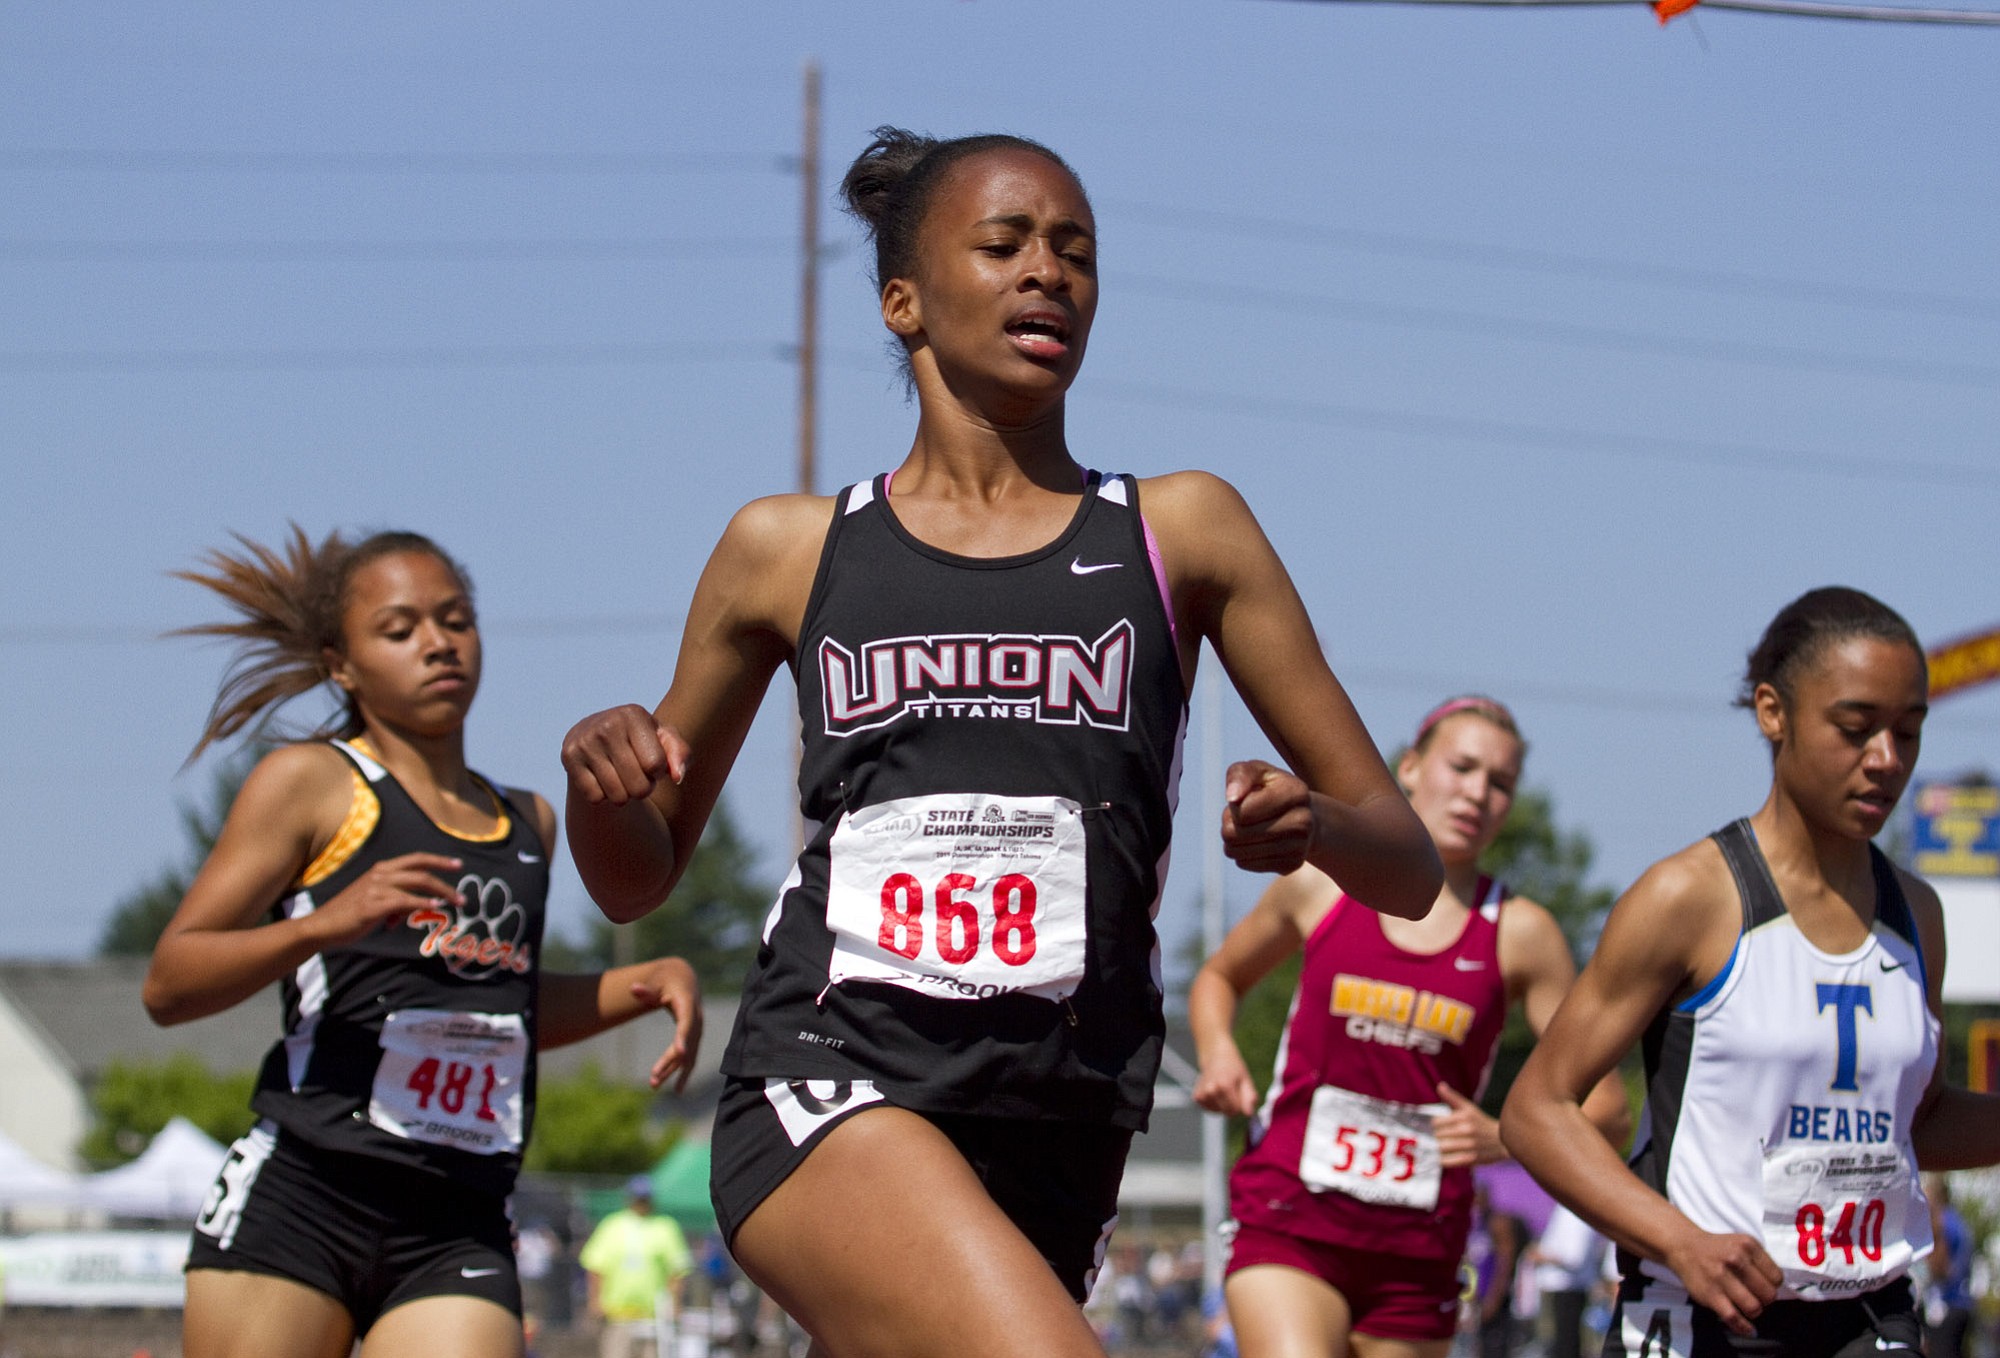 Union sophomore Dai'lyn Merriweather crosses the finish line to win the 4A girls 200 meters at the state track and field championships Saturday in Tacoma (Patrick Hagerty/For The Columbian)